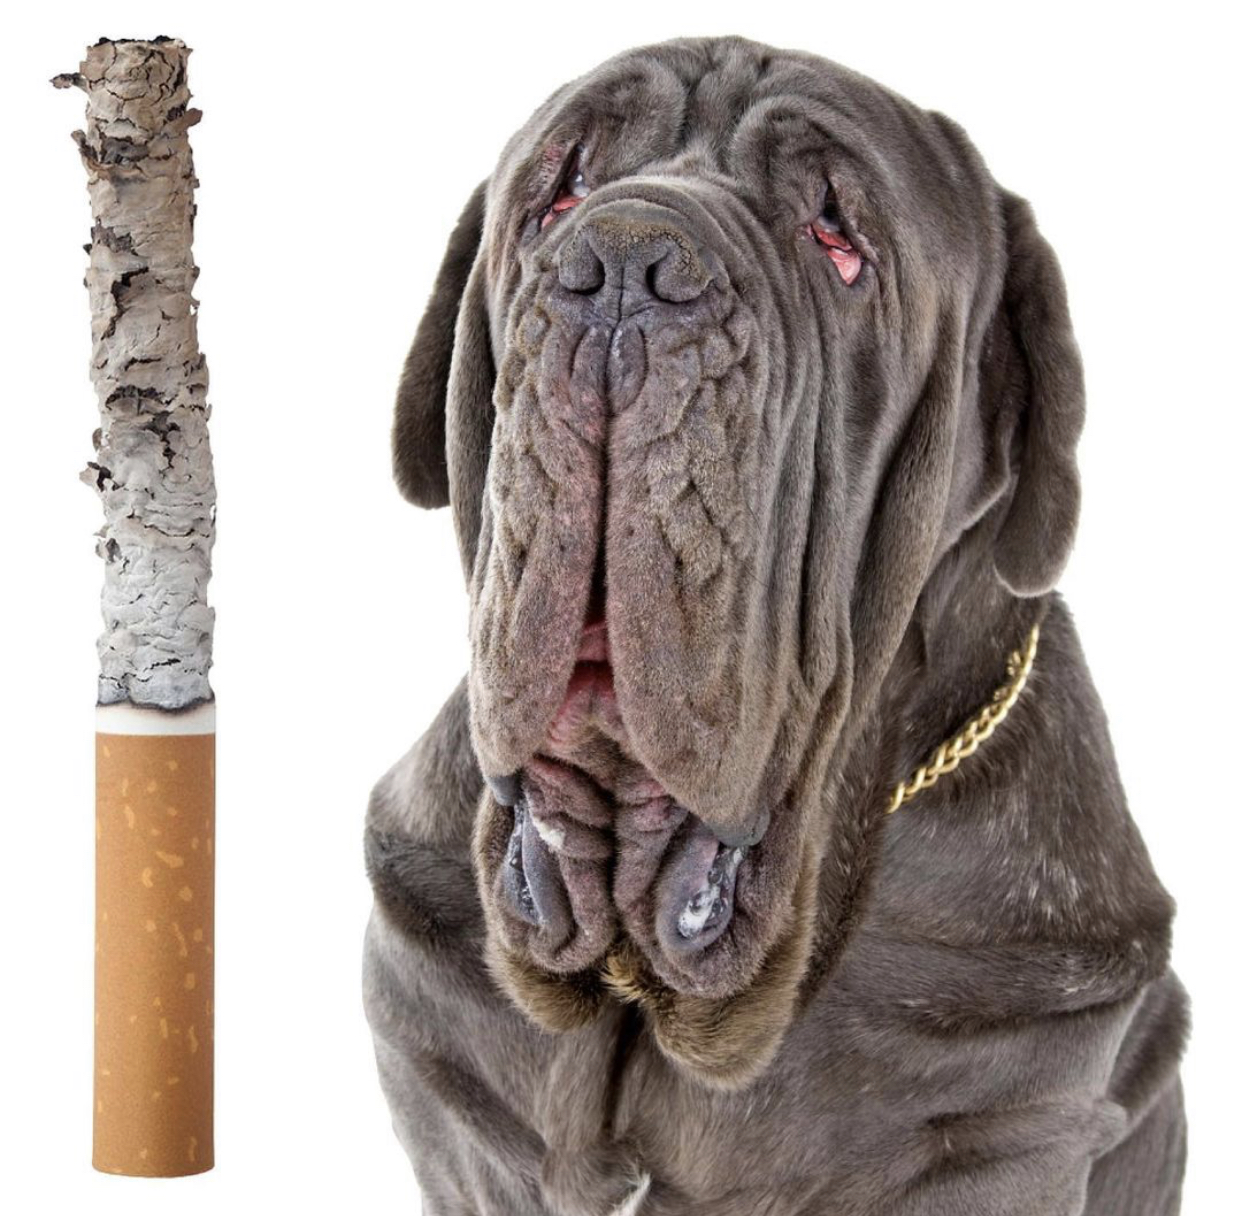 This is the dog that blasts cigs. Or: lets cigs burn out 